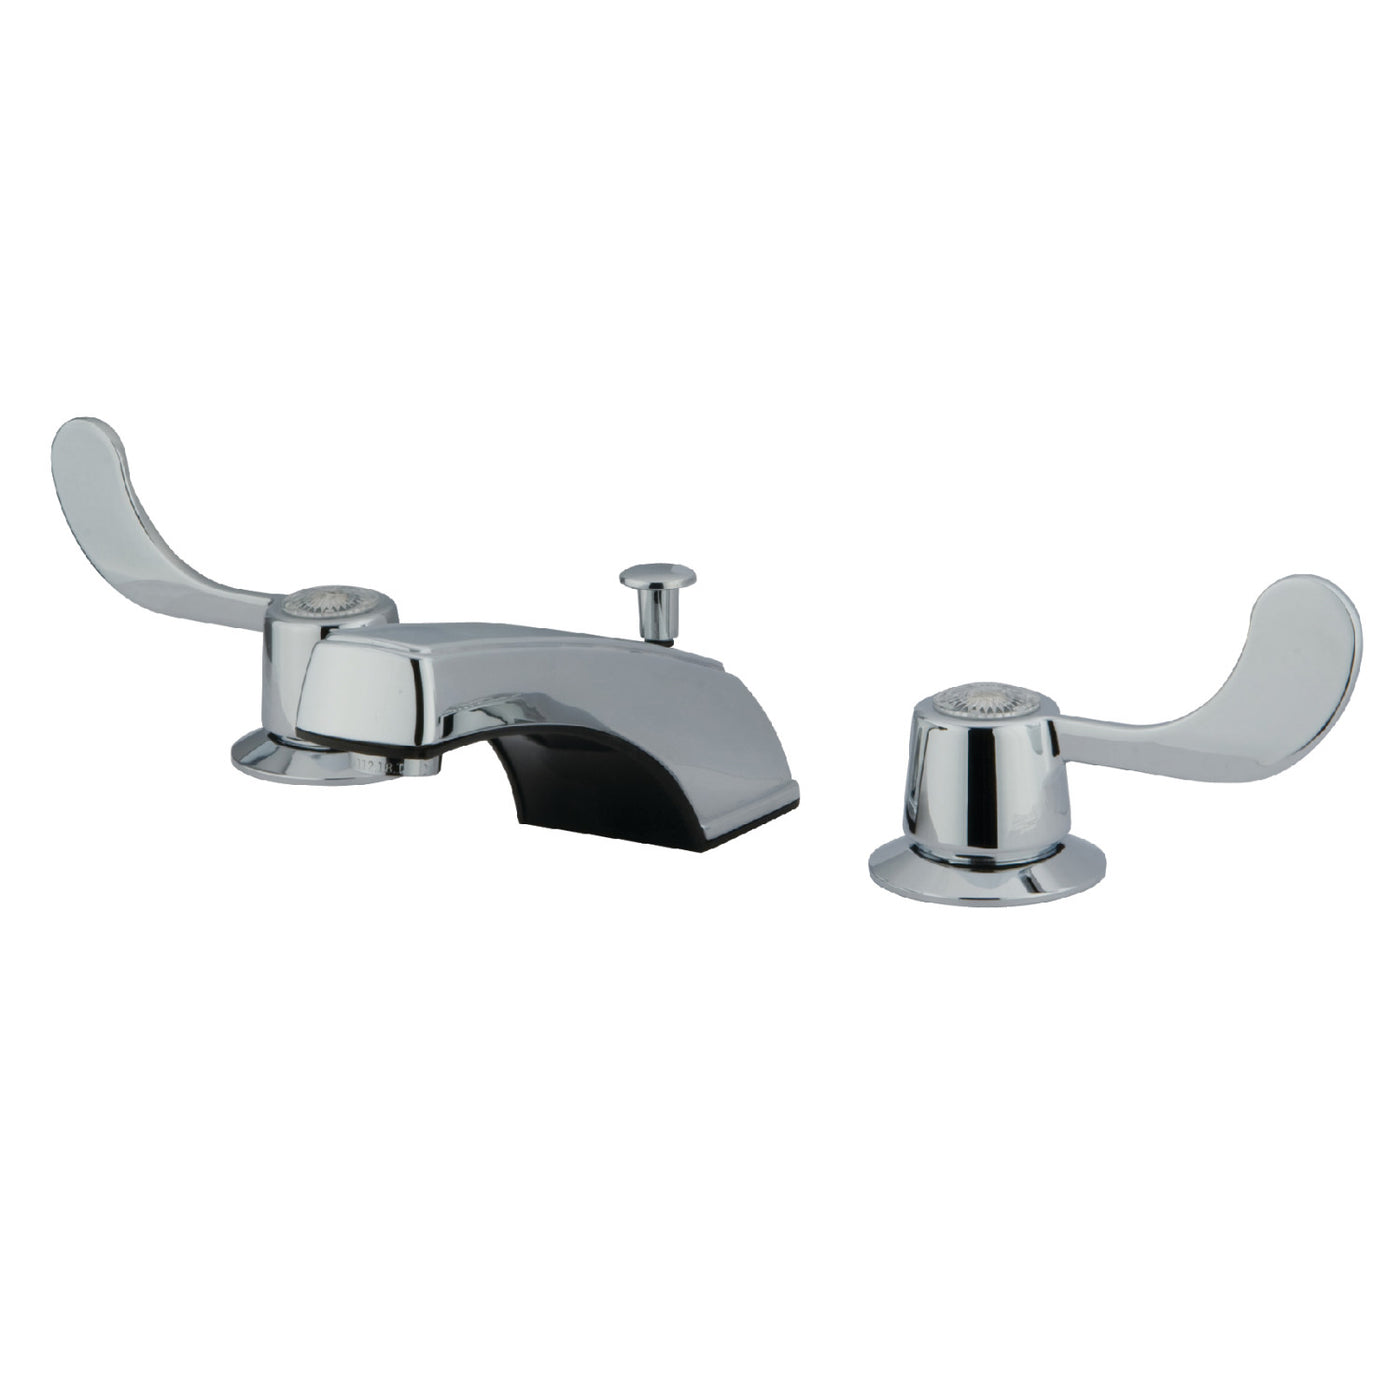 Elements of Design EB931B Widespread Bathroom Faucet with Retail Pop-Up, Polished Chrome